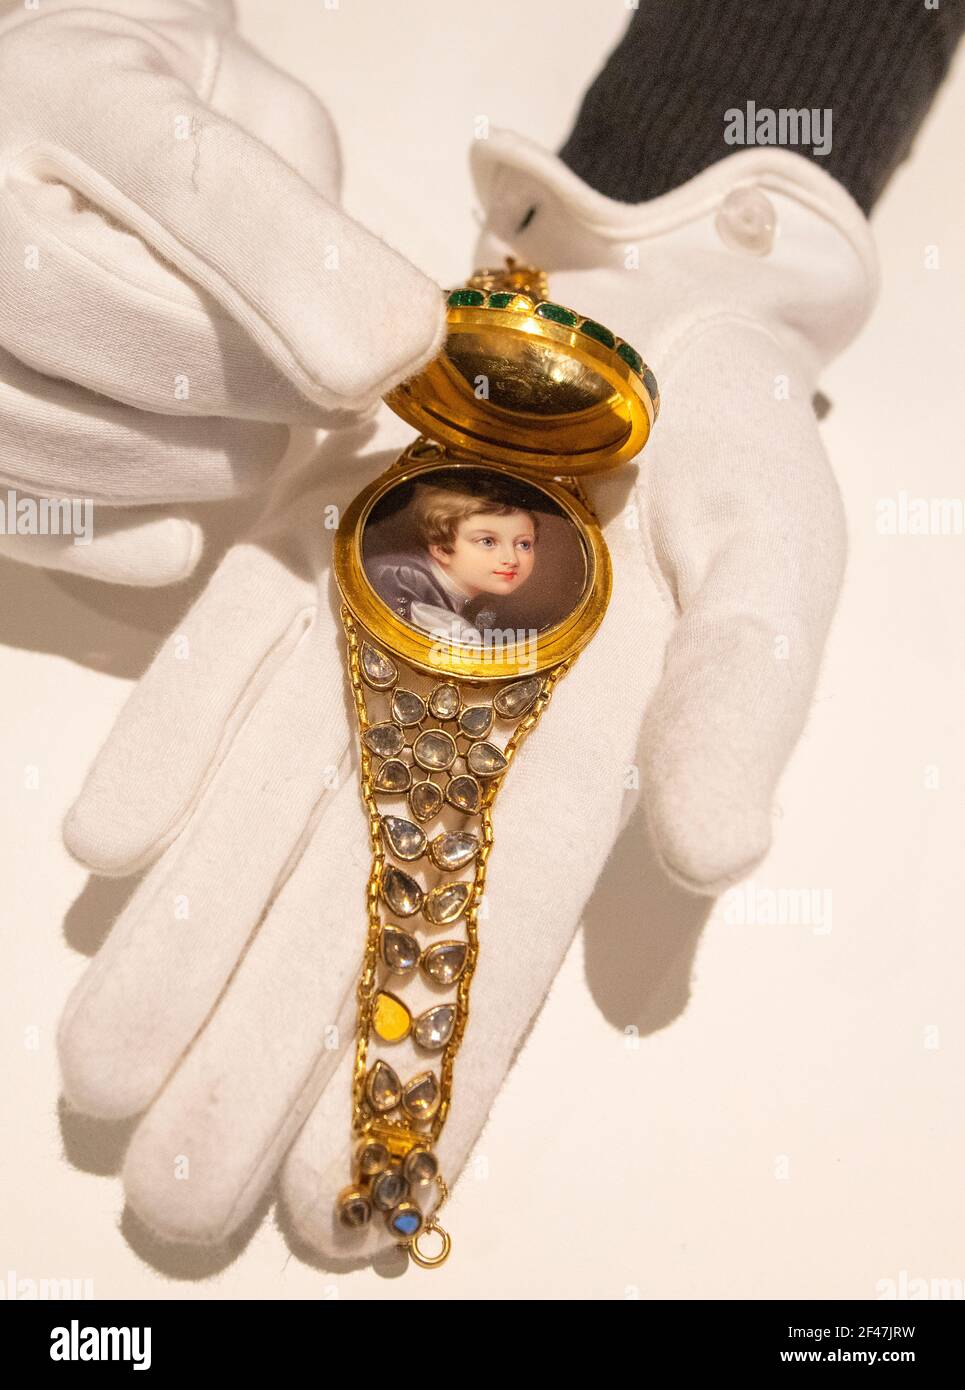 Sotheby’s, London, UK. 19 March 2021. The Family Collection of The Late Countess Mountbatten of Burma, great-great-granddaughter of Queen Victoria, will be offered at Sotheby’s London on 24 March and includes jewellery, furniture, paintings, sculpture, books, silver, ceramics & objets d’Art. Image: A Diamond-set and enamelled gold bracelet containing a miniature portrait of Albert, Prince Consort, as a child, By Henry Pierce Bone (177901855), India and England, 19th century, estimate £4,000-6,000. Credit: Malcolm Park/Alamy Live News. Stock Photo